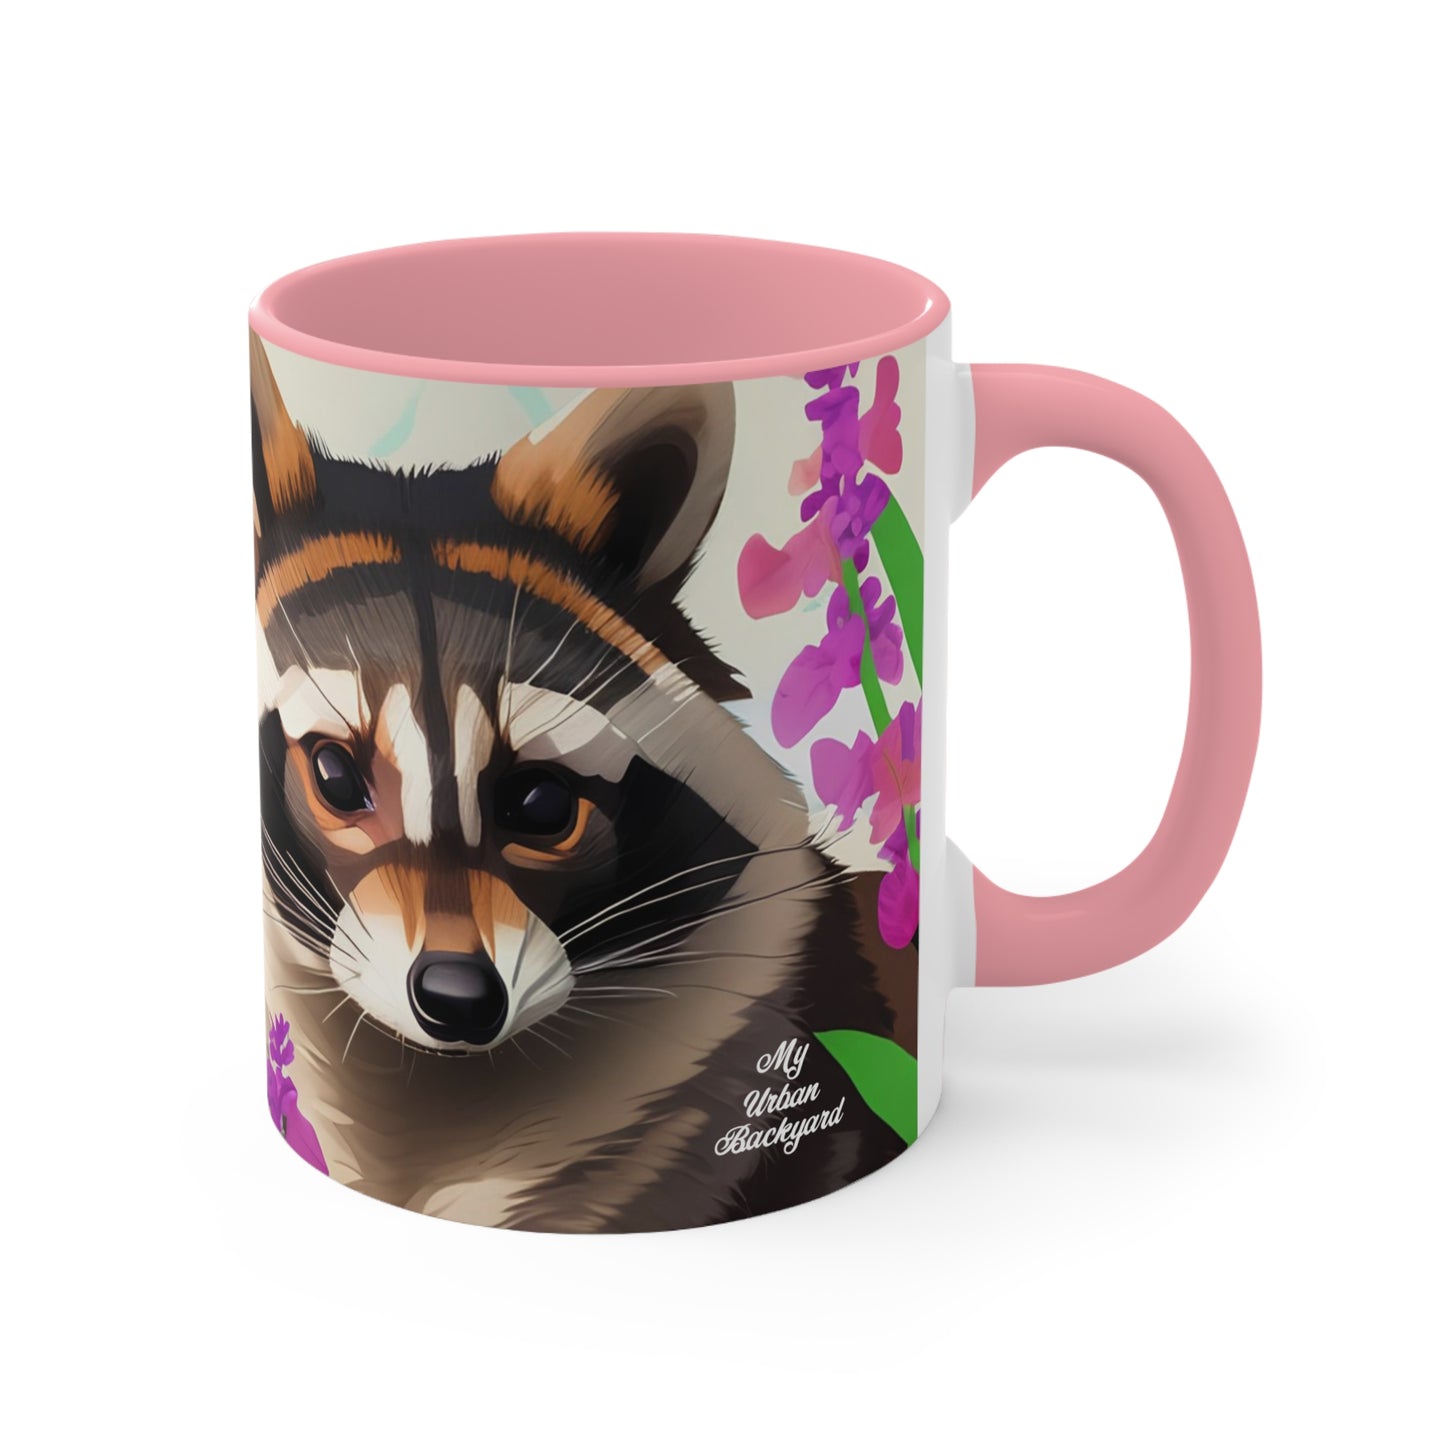 Raccoon with Flowers, Ceramic Mug - Perfect for Coffee, Tea, and More!